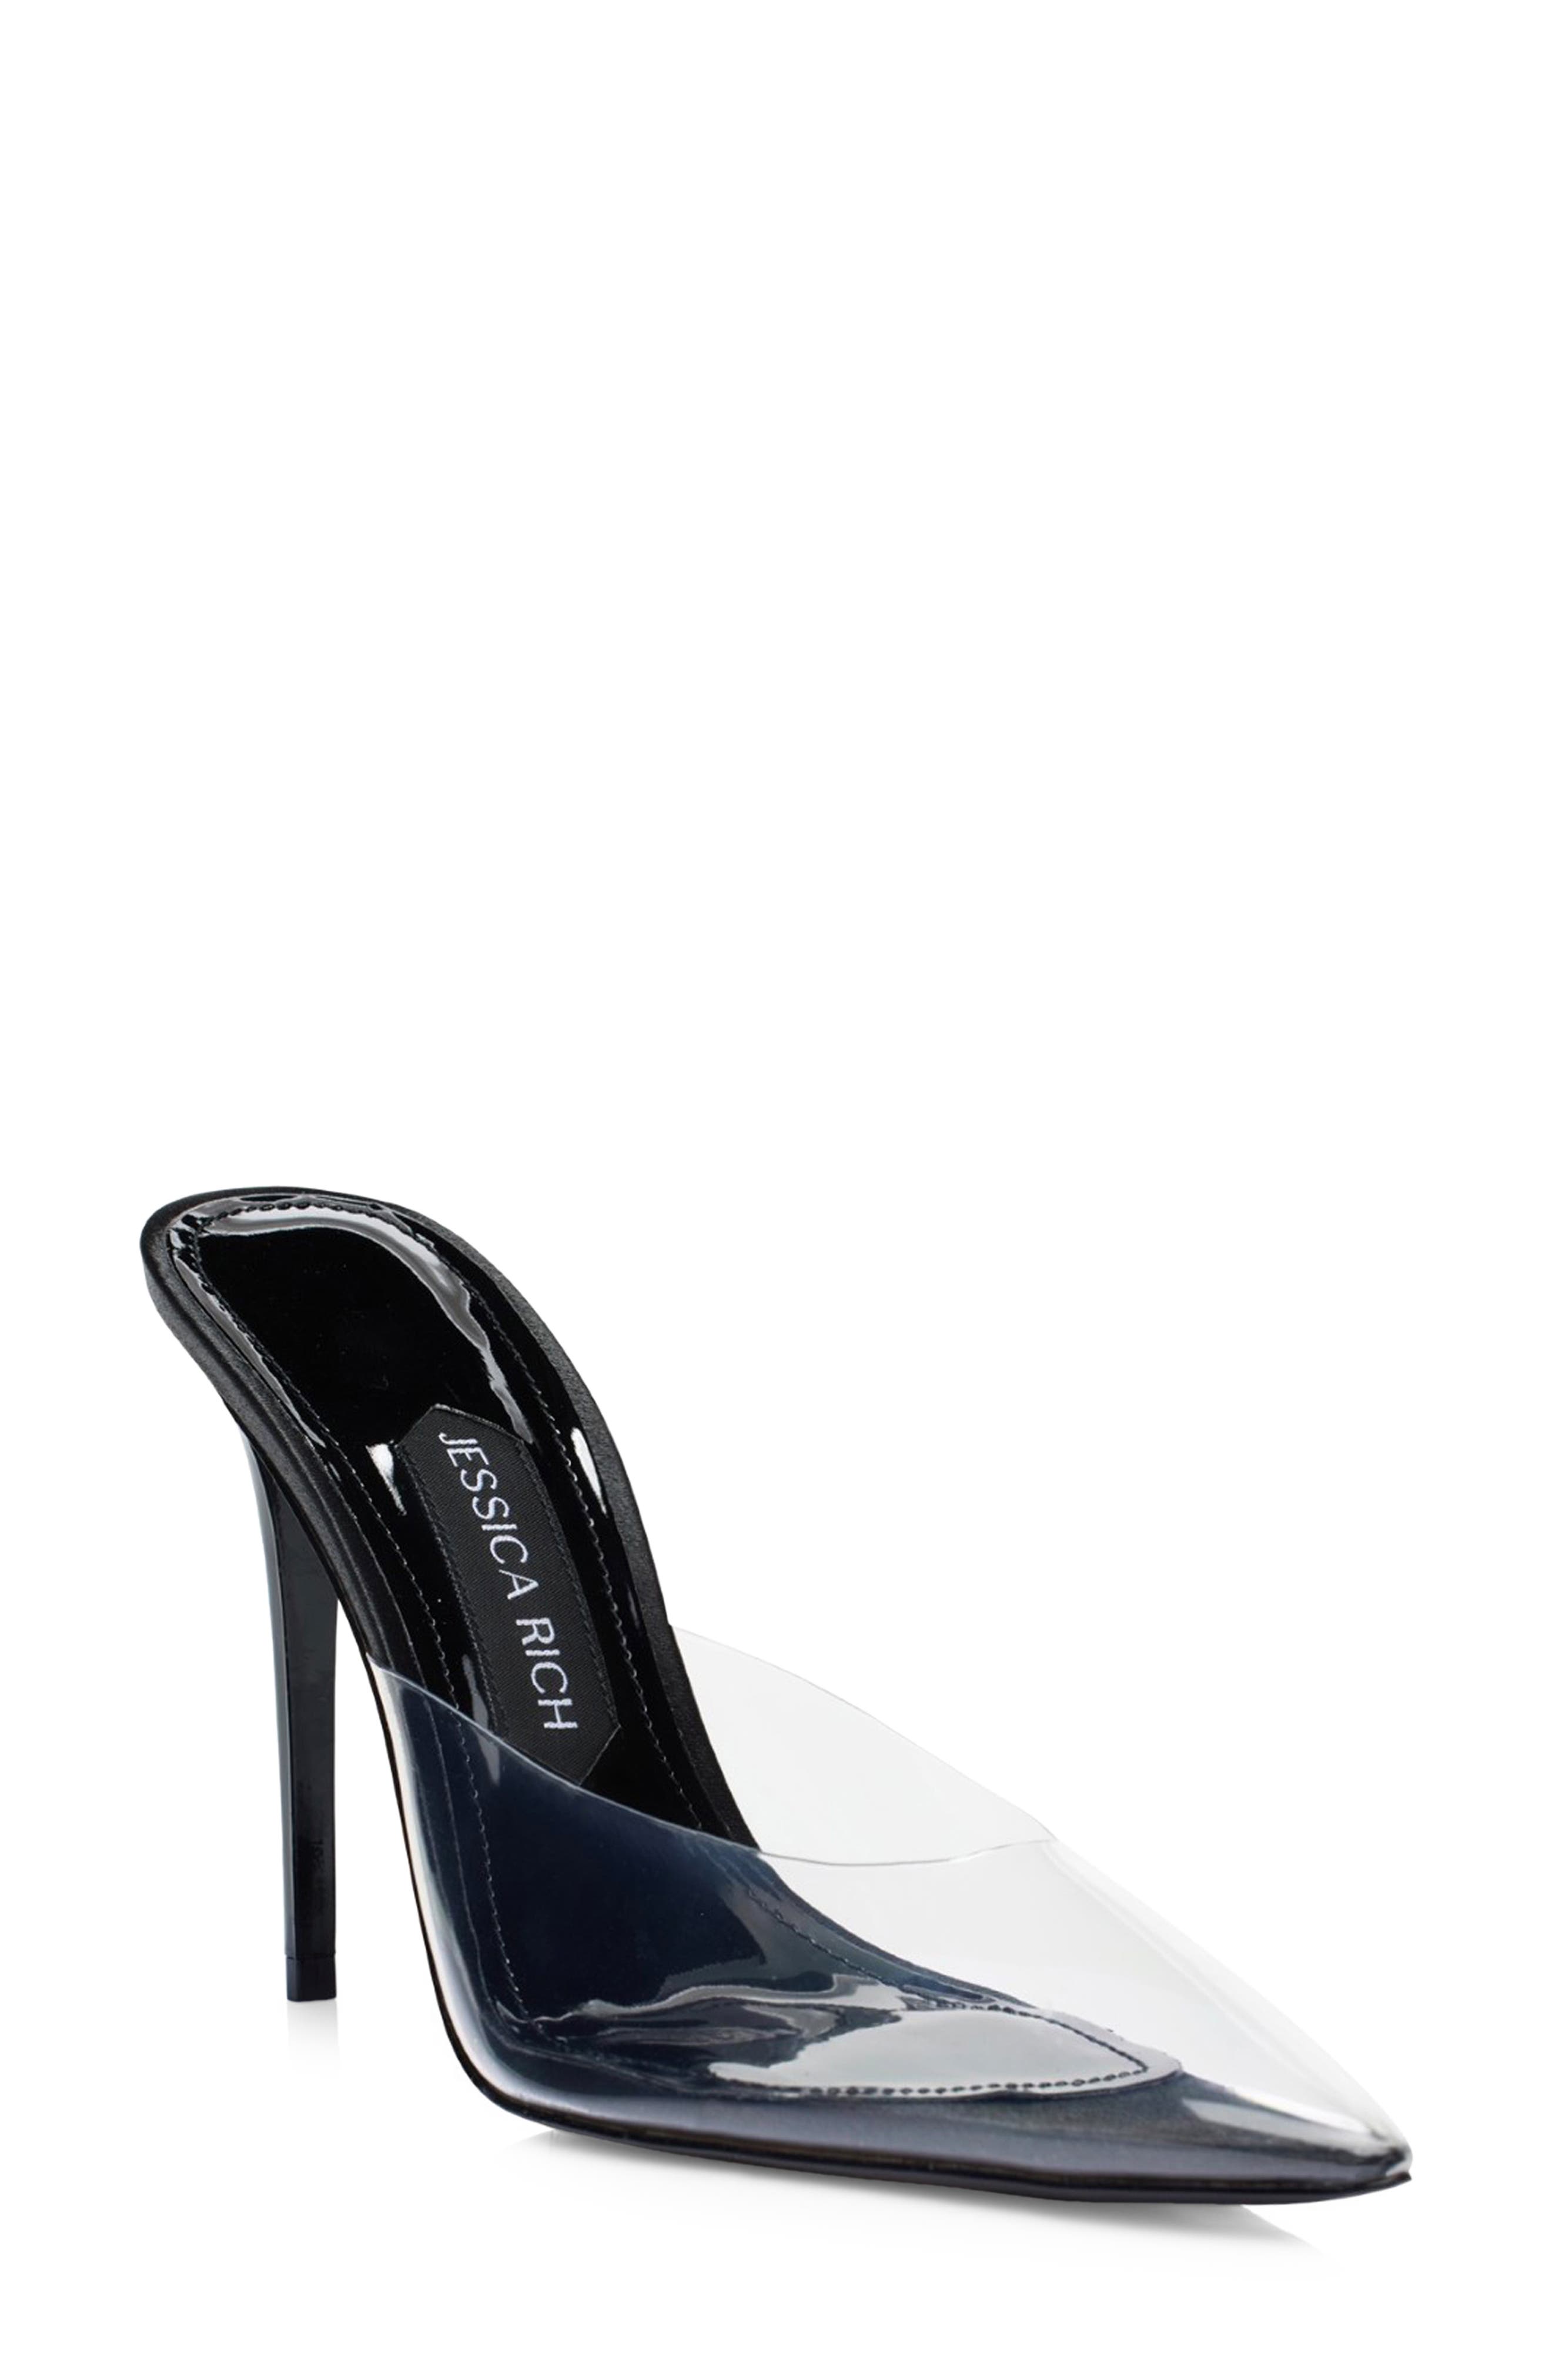 JESSICA RICH So Bossy Pointed Toe Pump in Black at Nordstrom